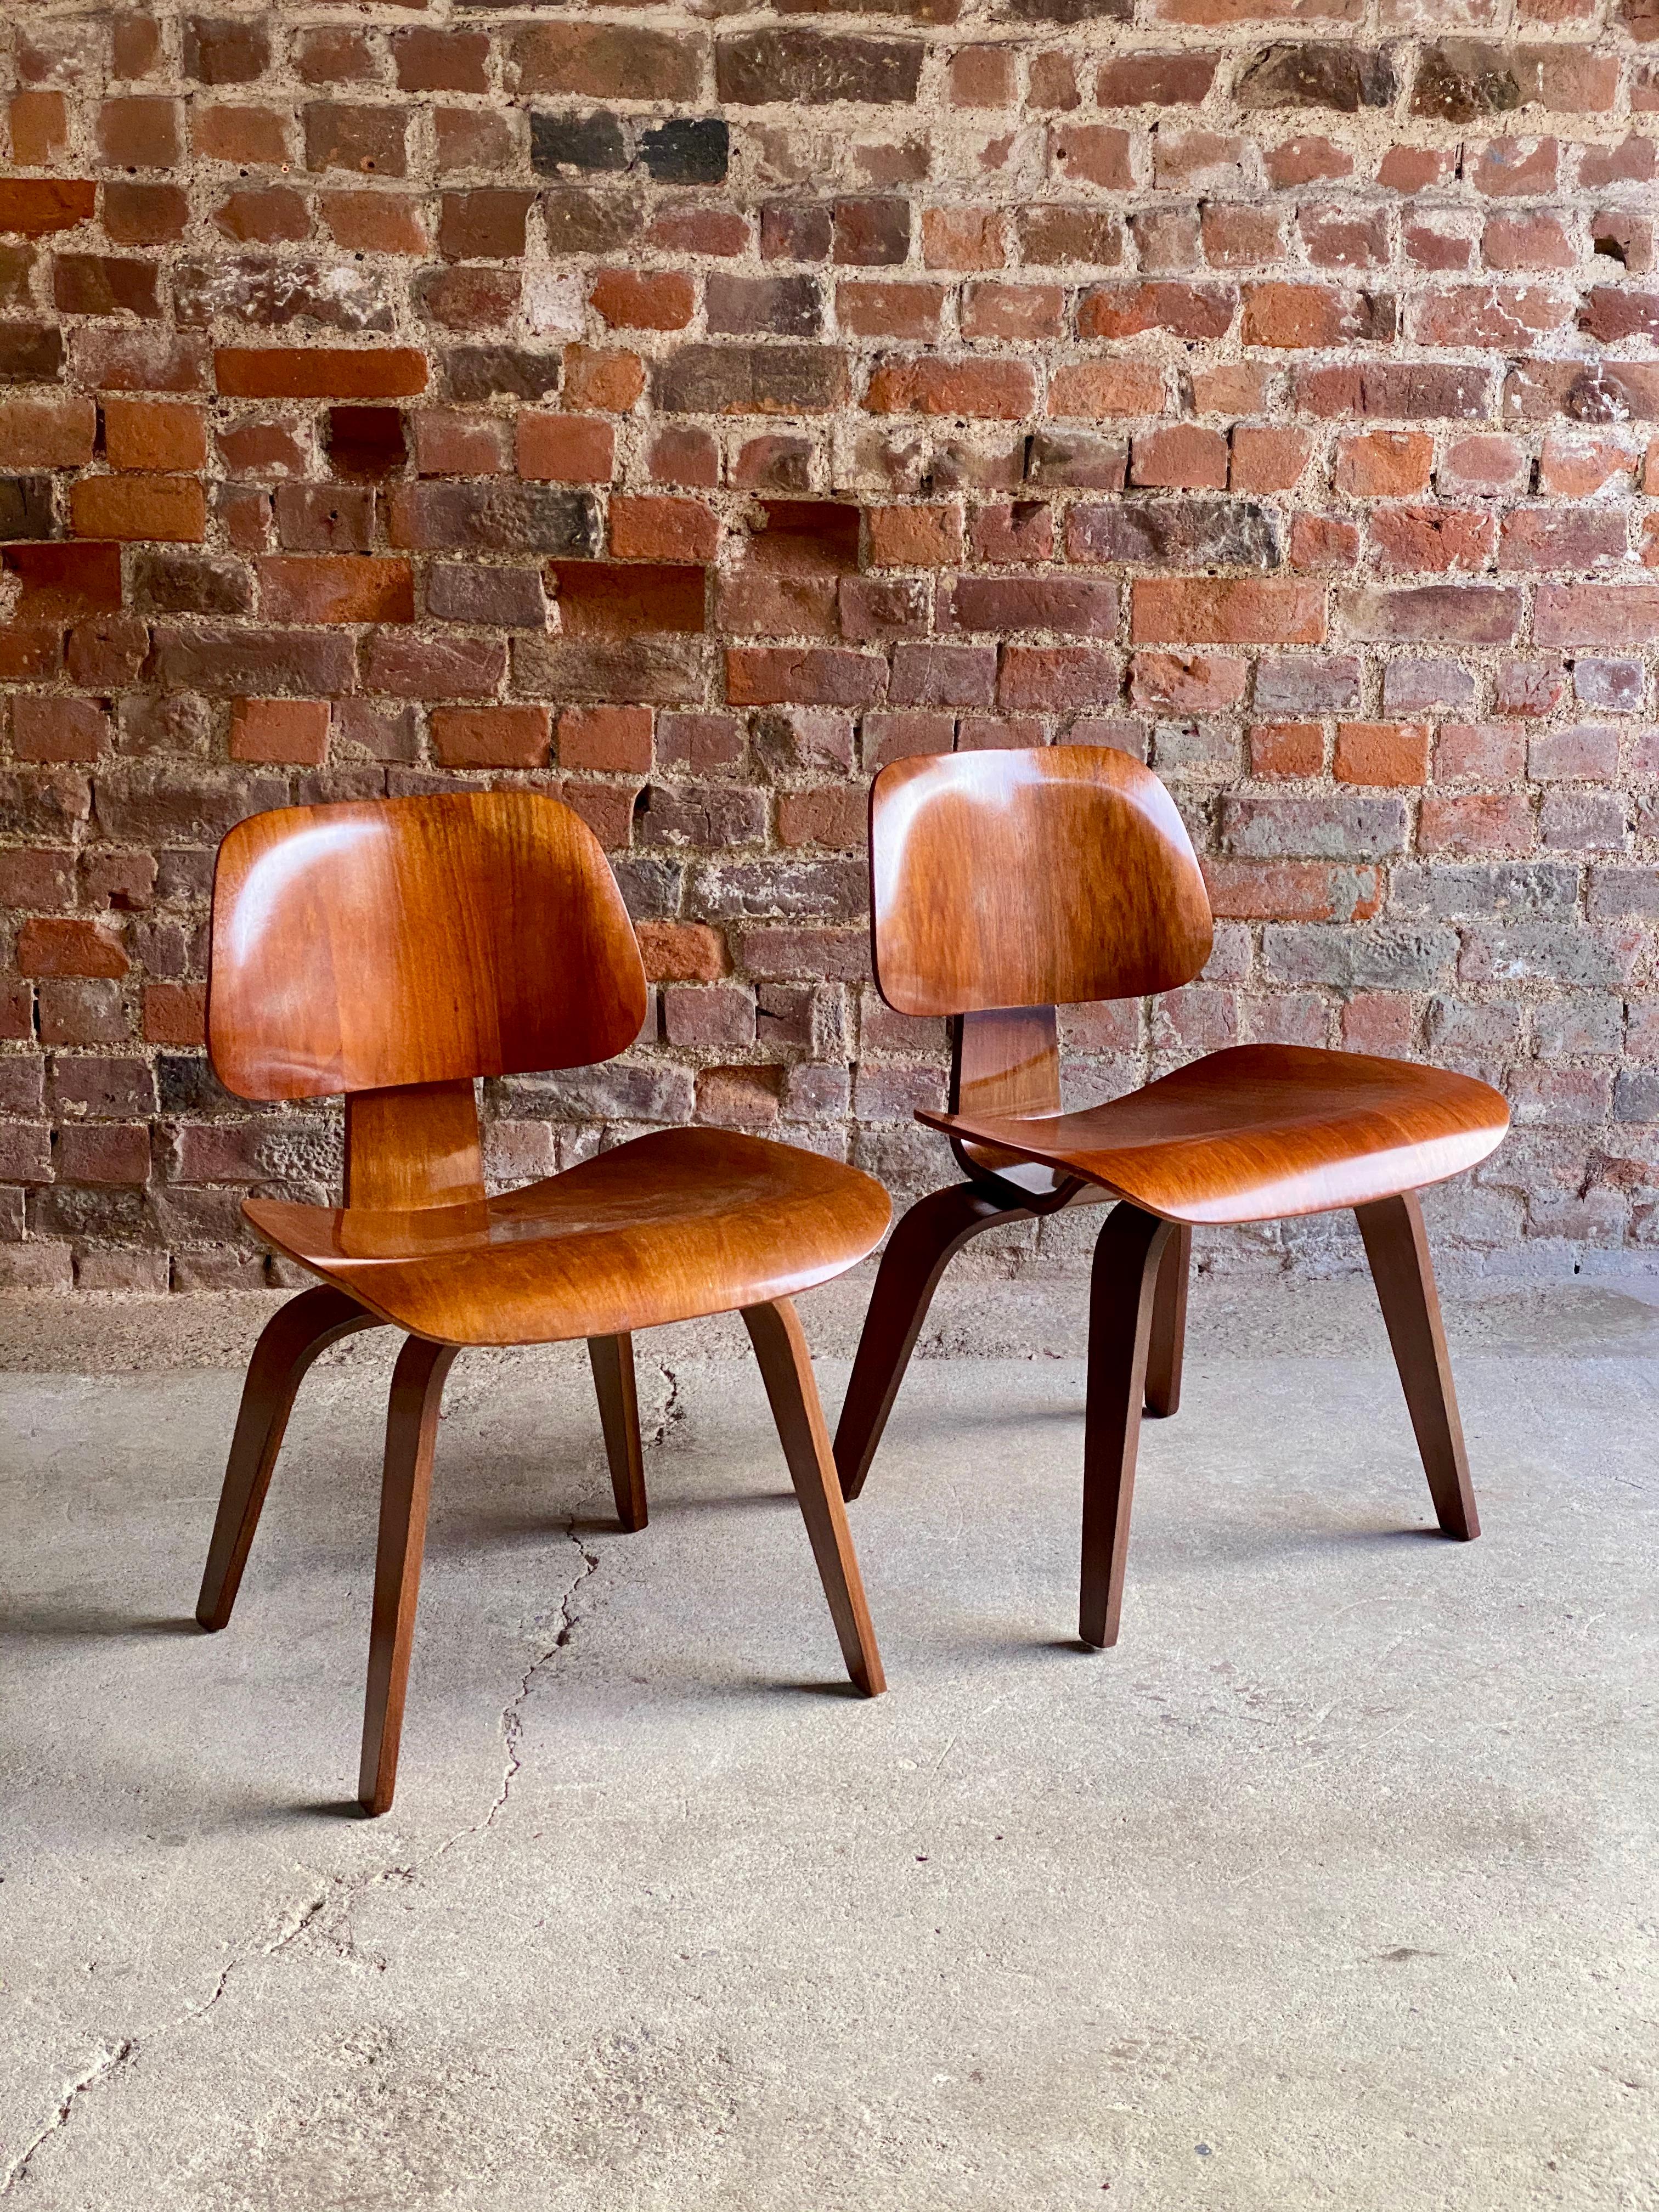 American Charles Eames DCW Dining Chairs by Herman Miller, circa 1950